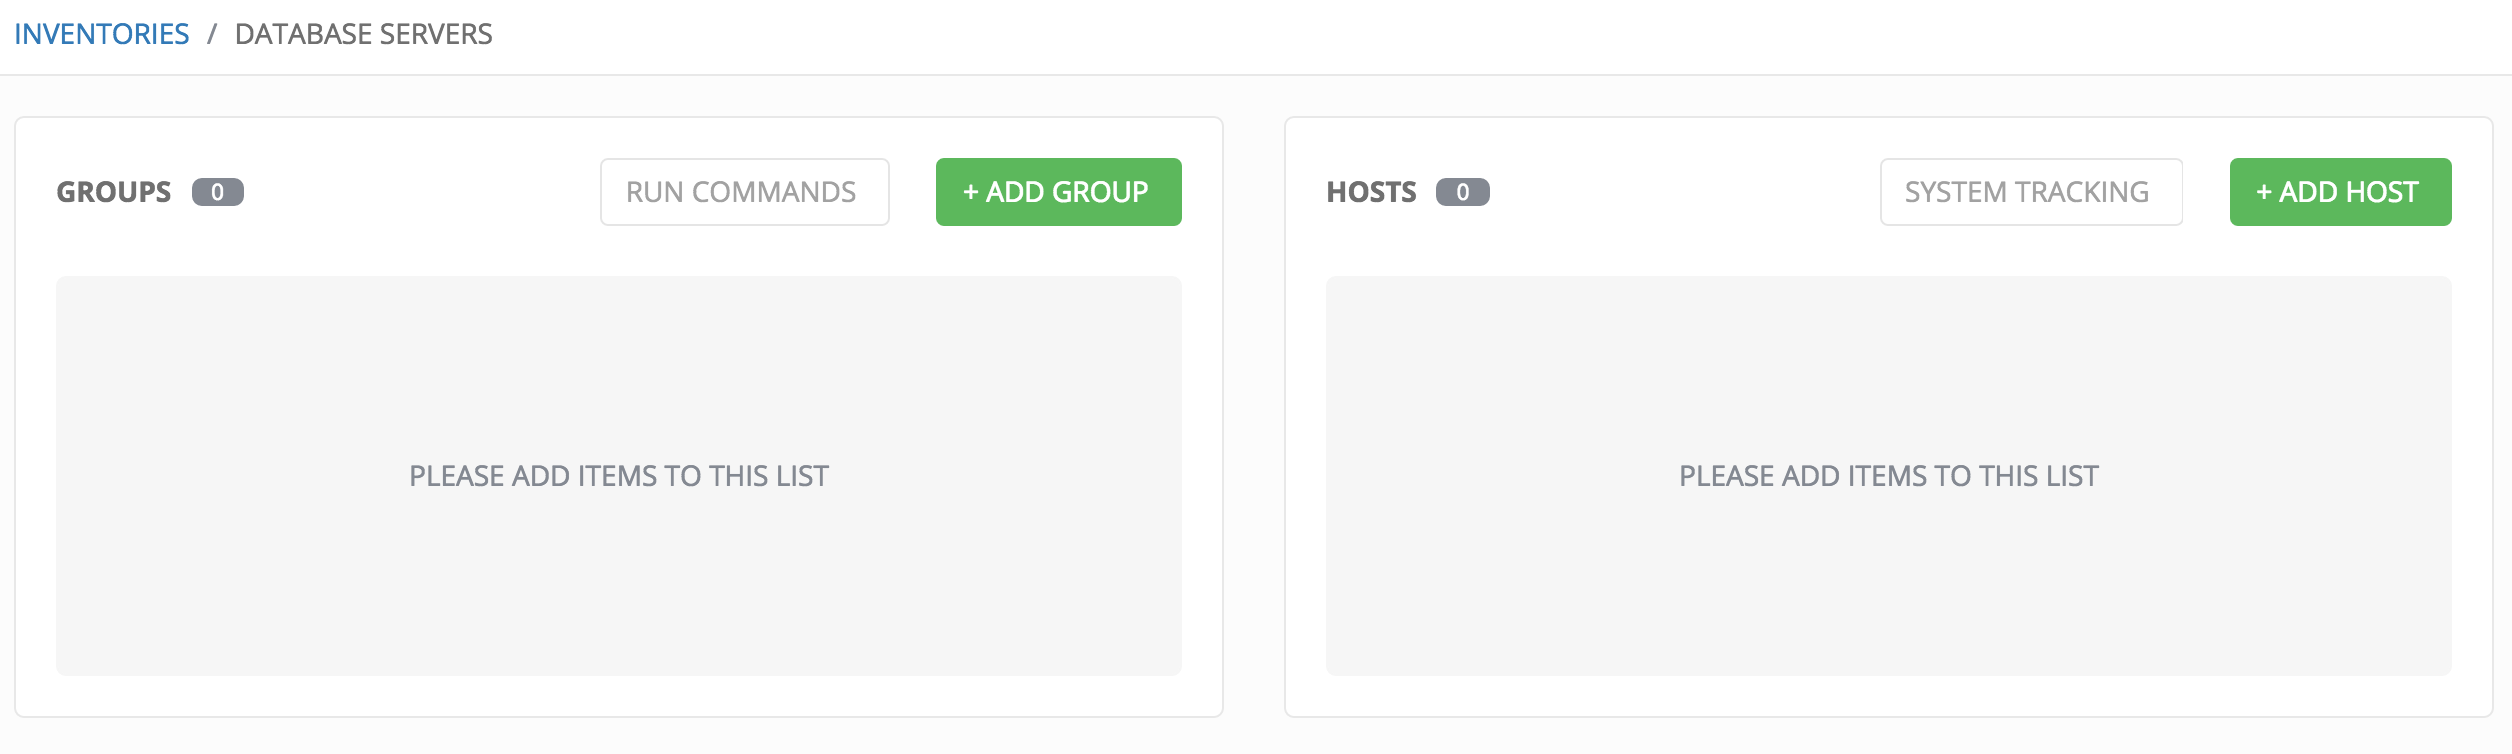 Inventories_manage_grouphost - new inventory group host manage